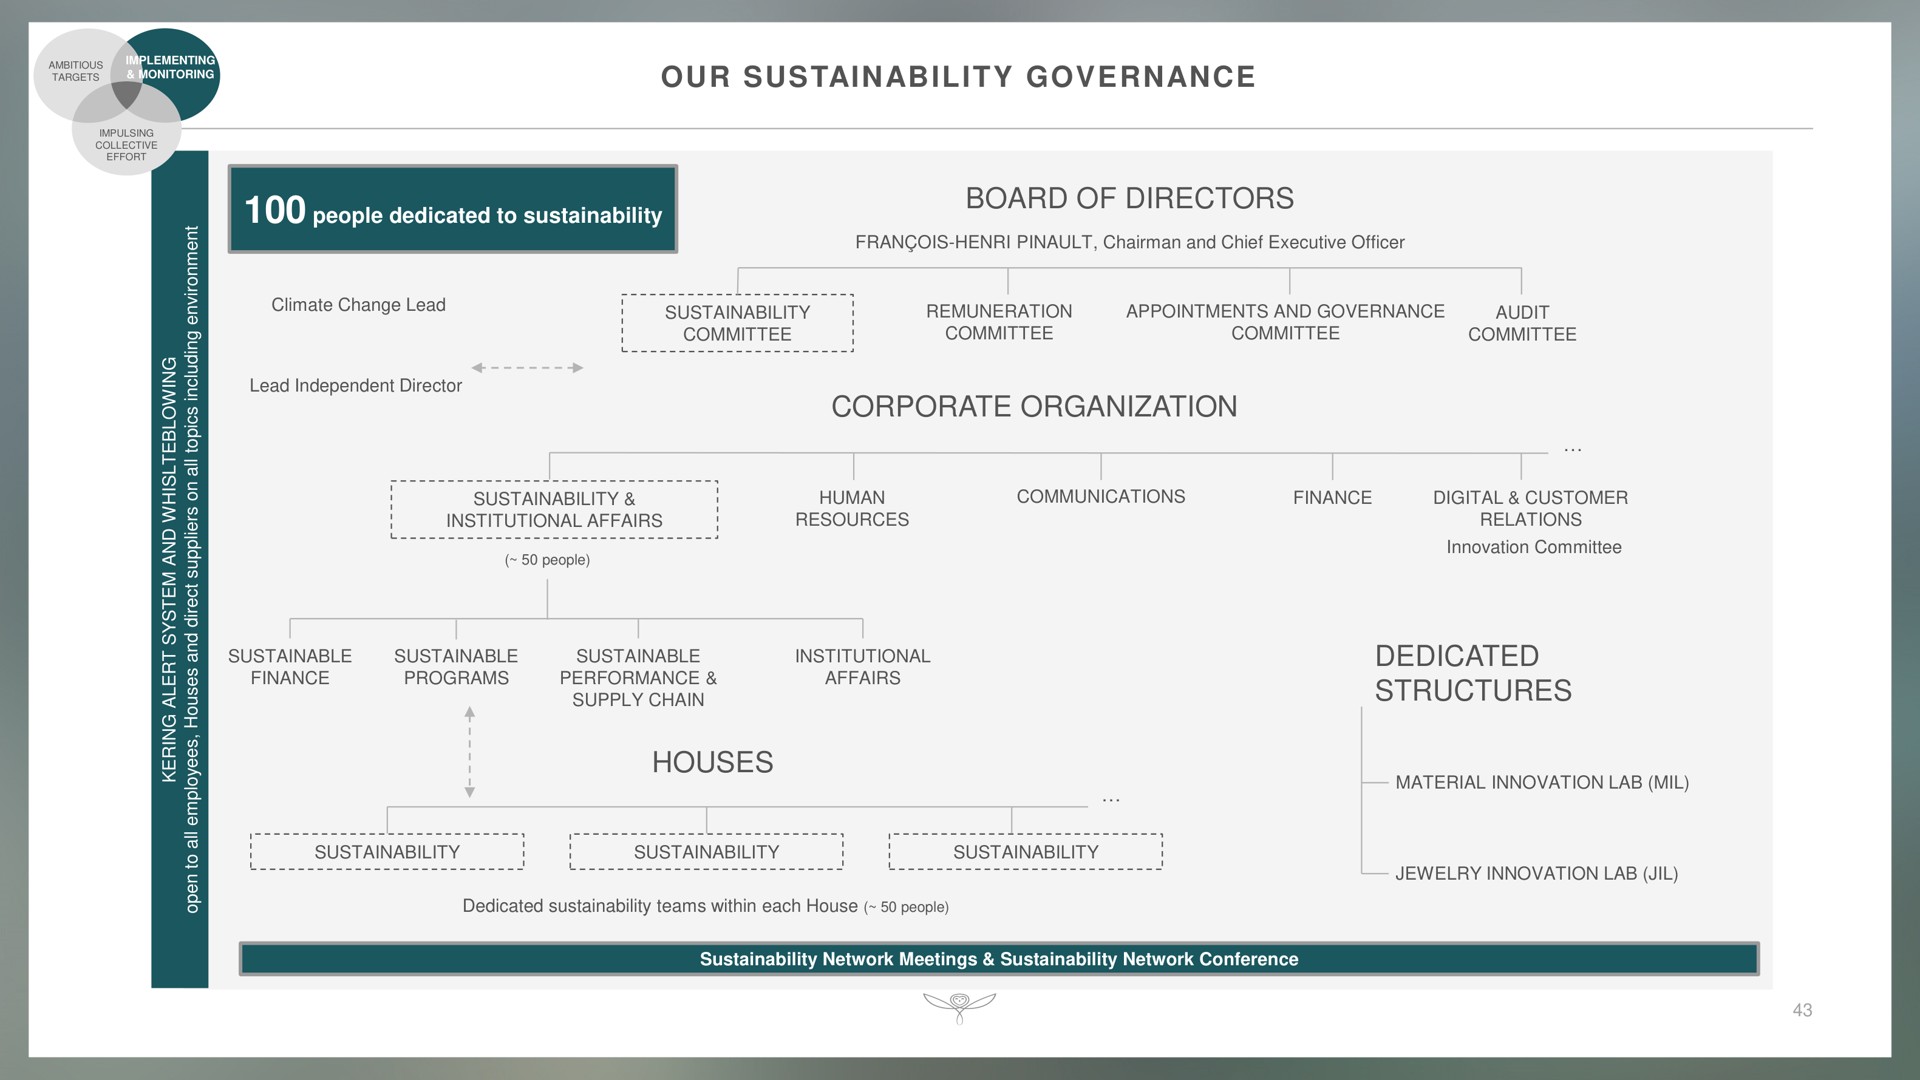 our governance board of directors corporate organization dedicated structures houses racers a cay climate change lead committee remuneration committee appointments and committee audit committee say | Kering